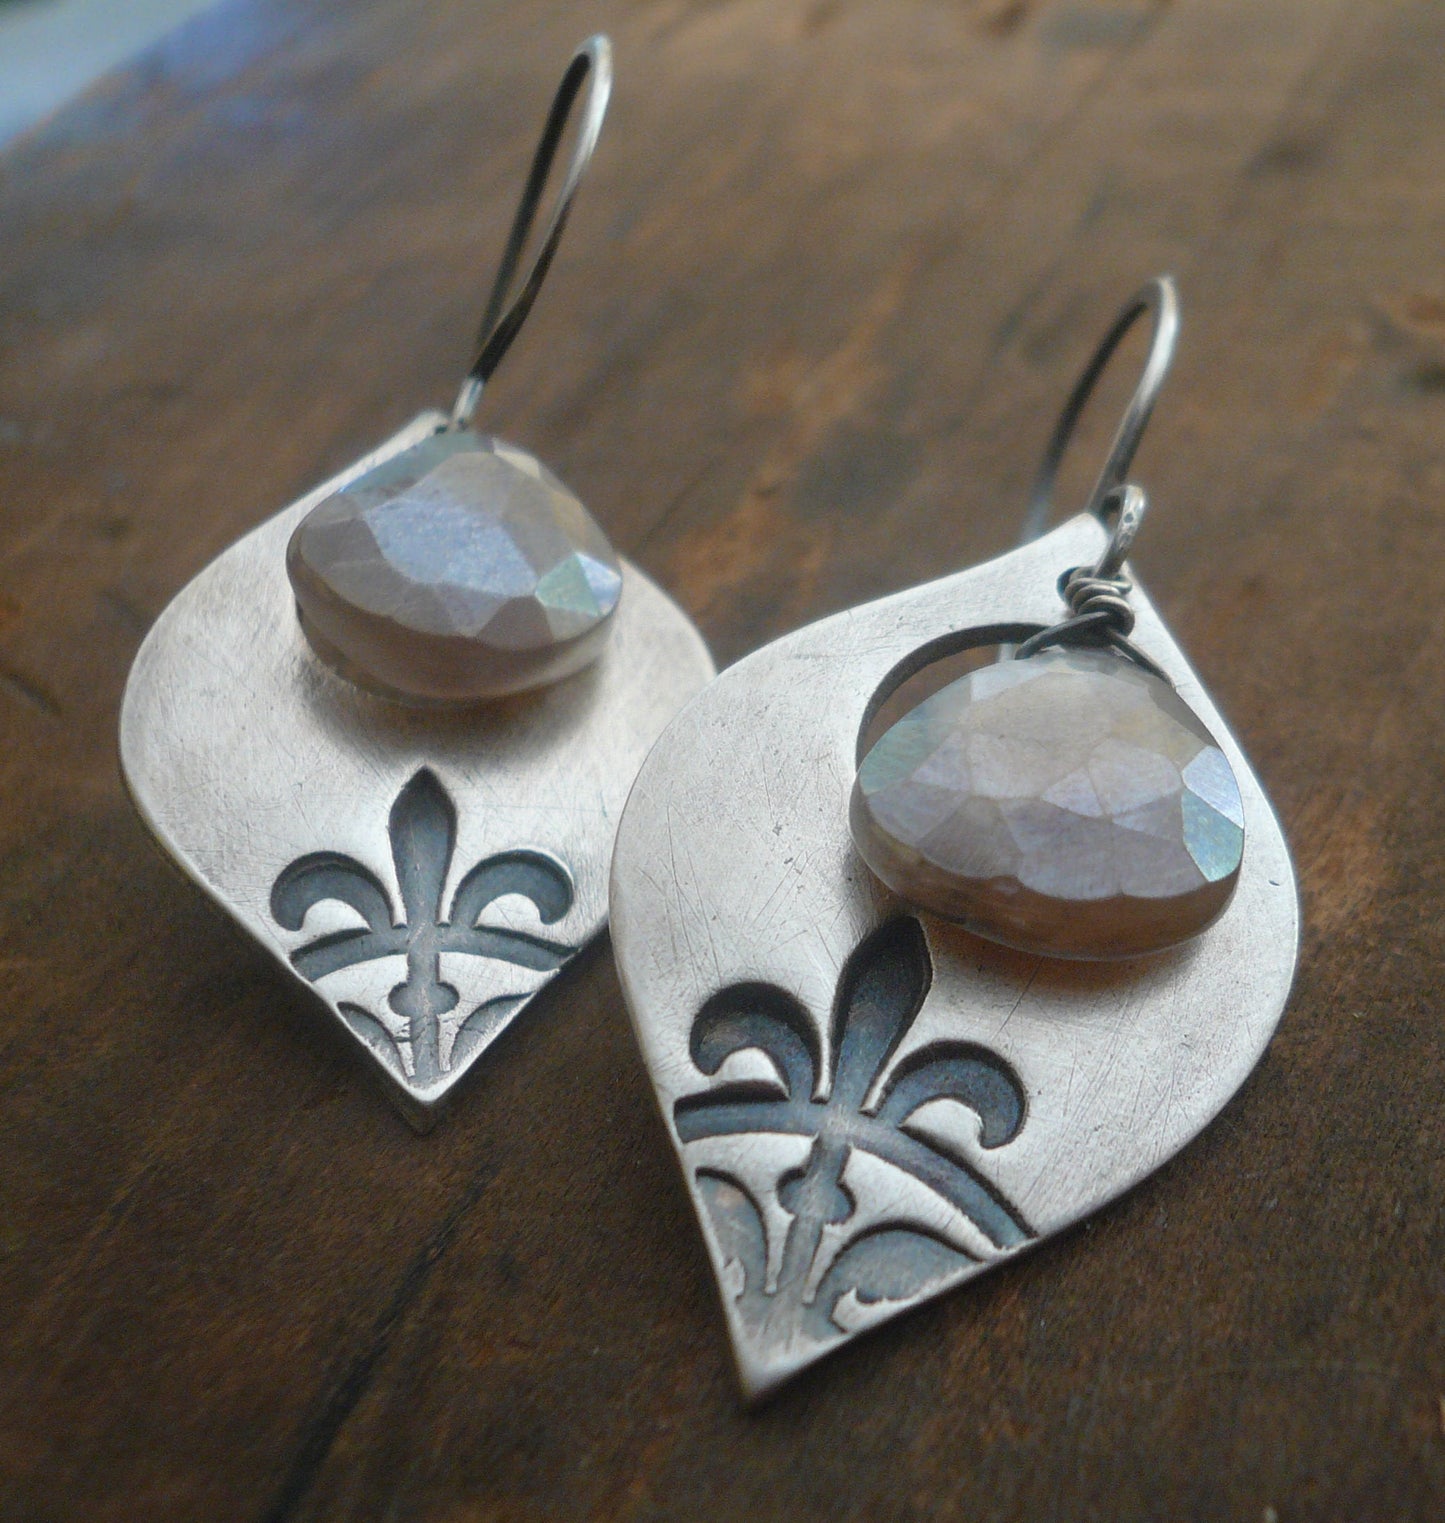 Creole Collection Drop Earrings- Champagne Moonstone. Oxidized Sterling and Fine Silver Dangle Earrings. Handmade.